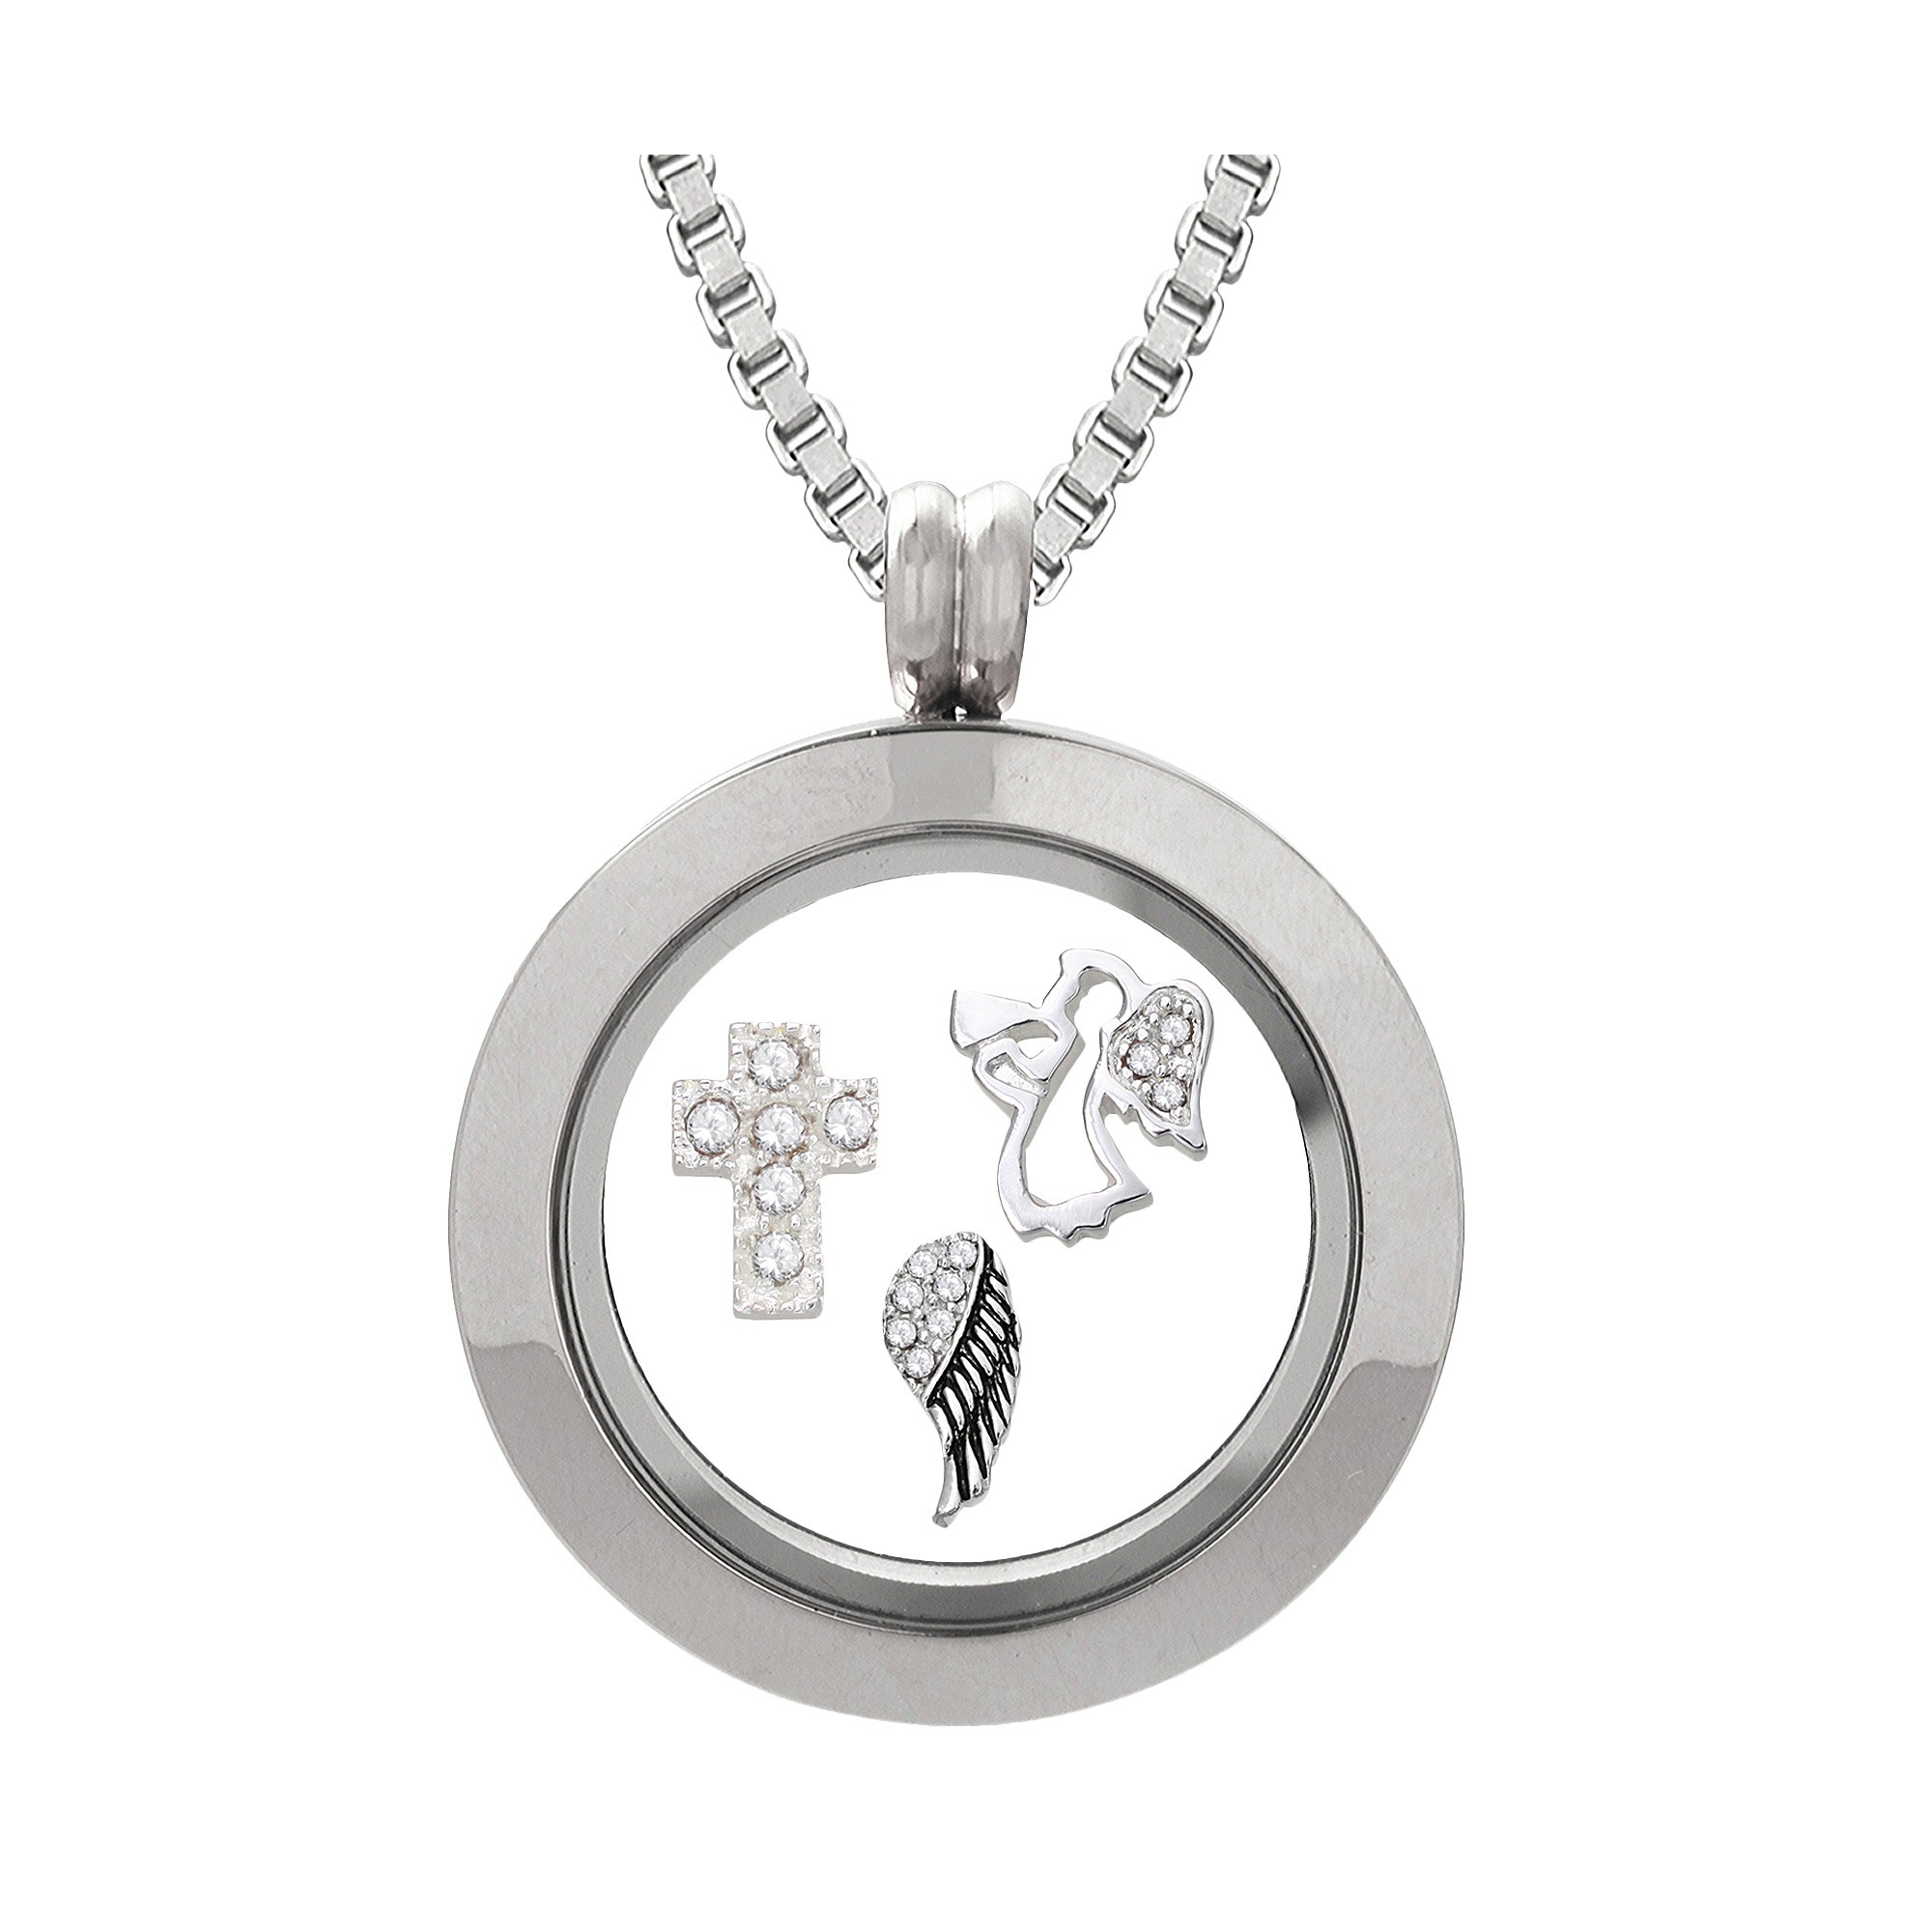 Treasure Lockets Silver Plated Stainless Steel Angel Charm Locket and Box Chain Necklace Set, Women's, Silver/Silver/Silver